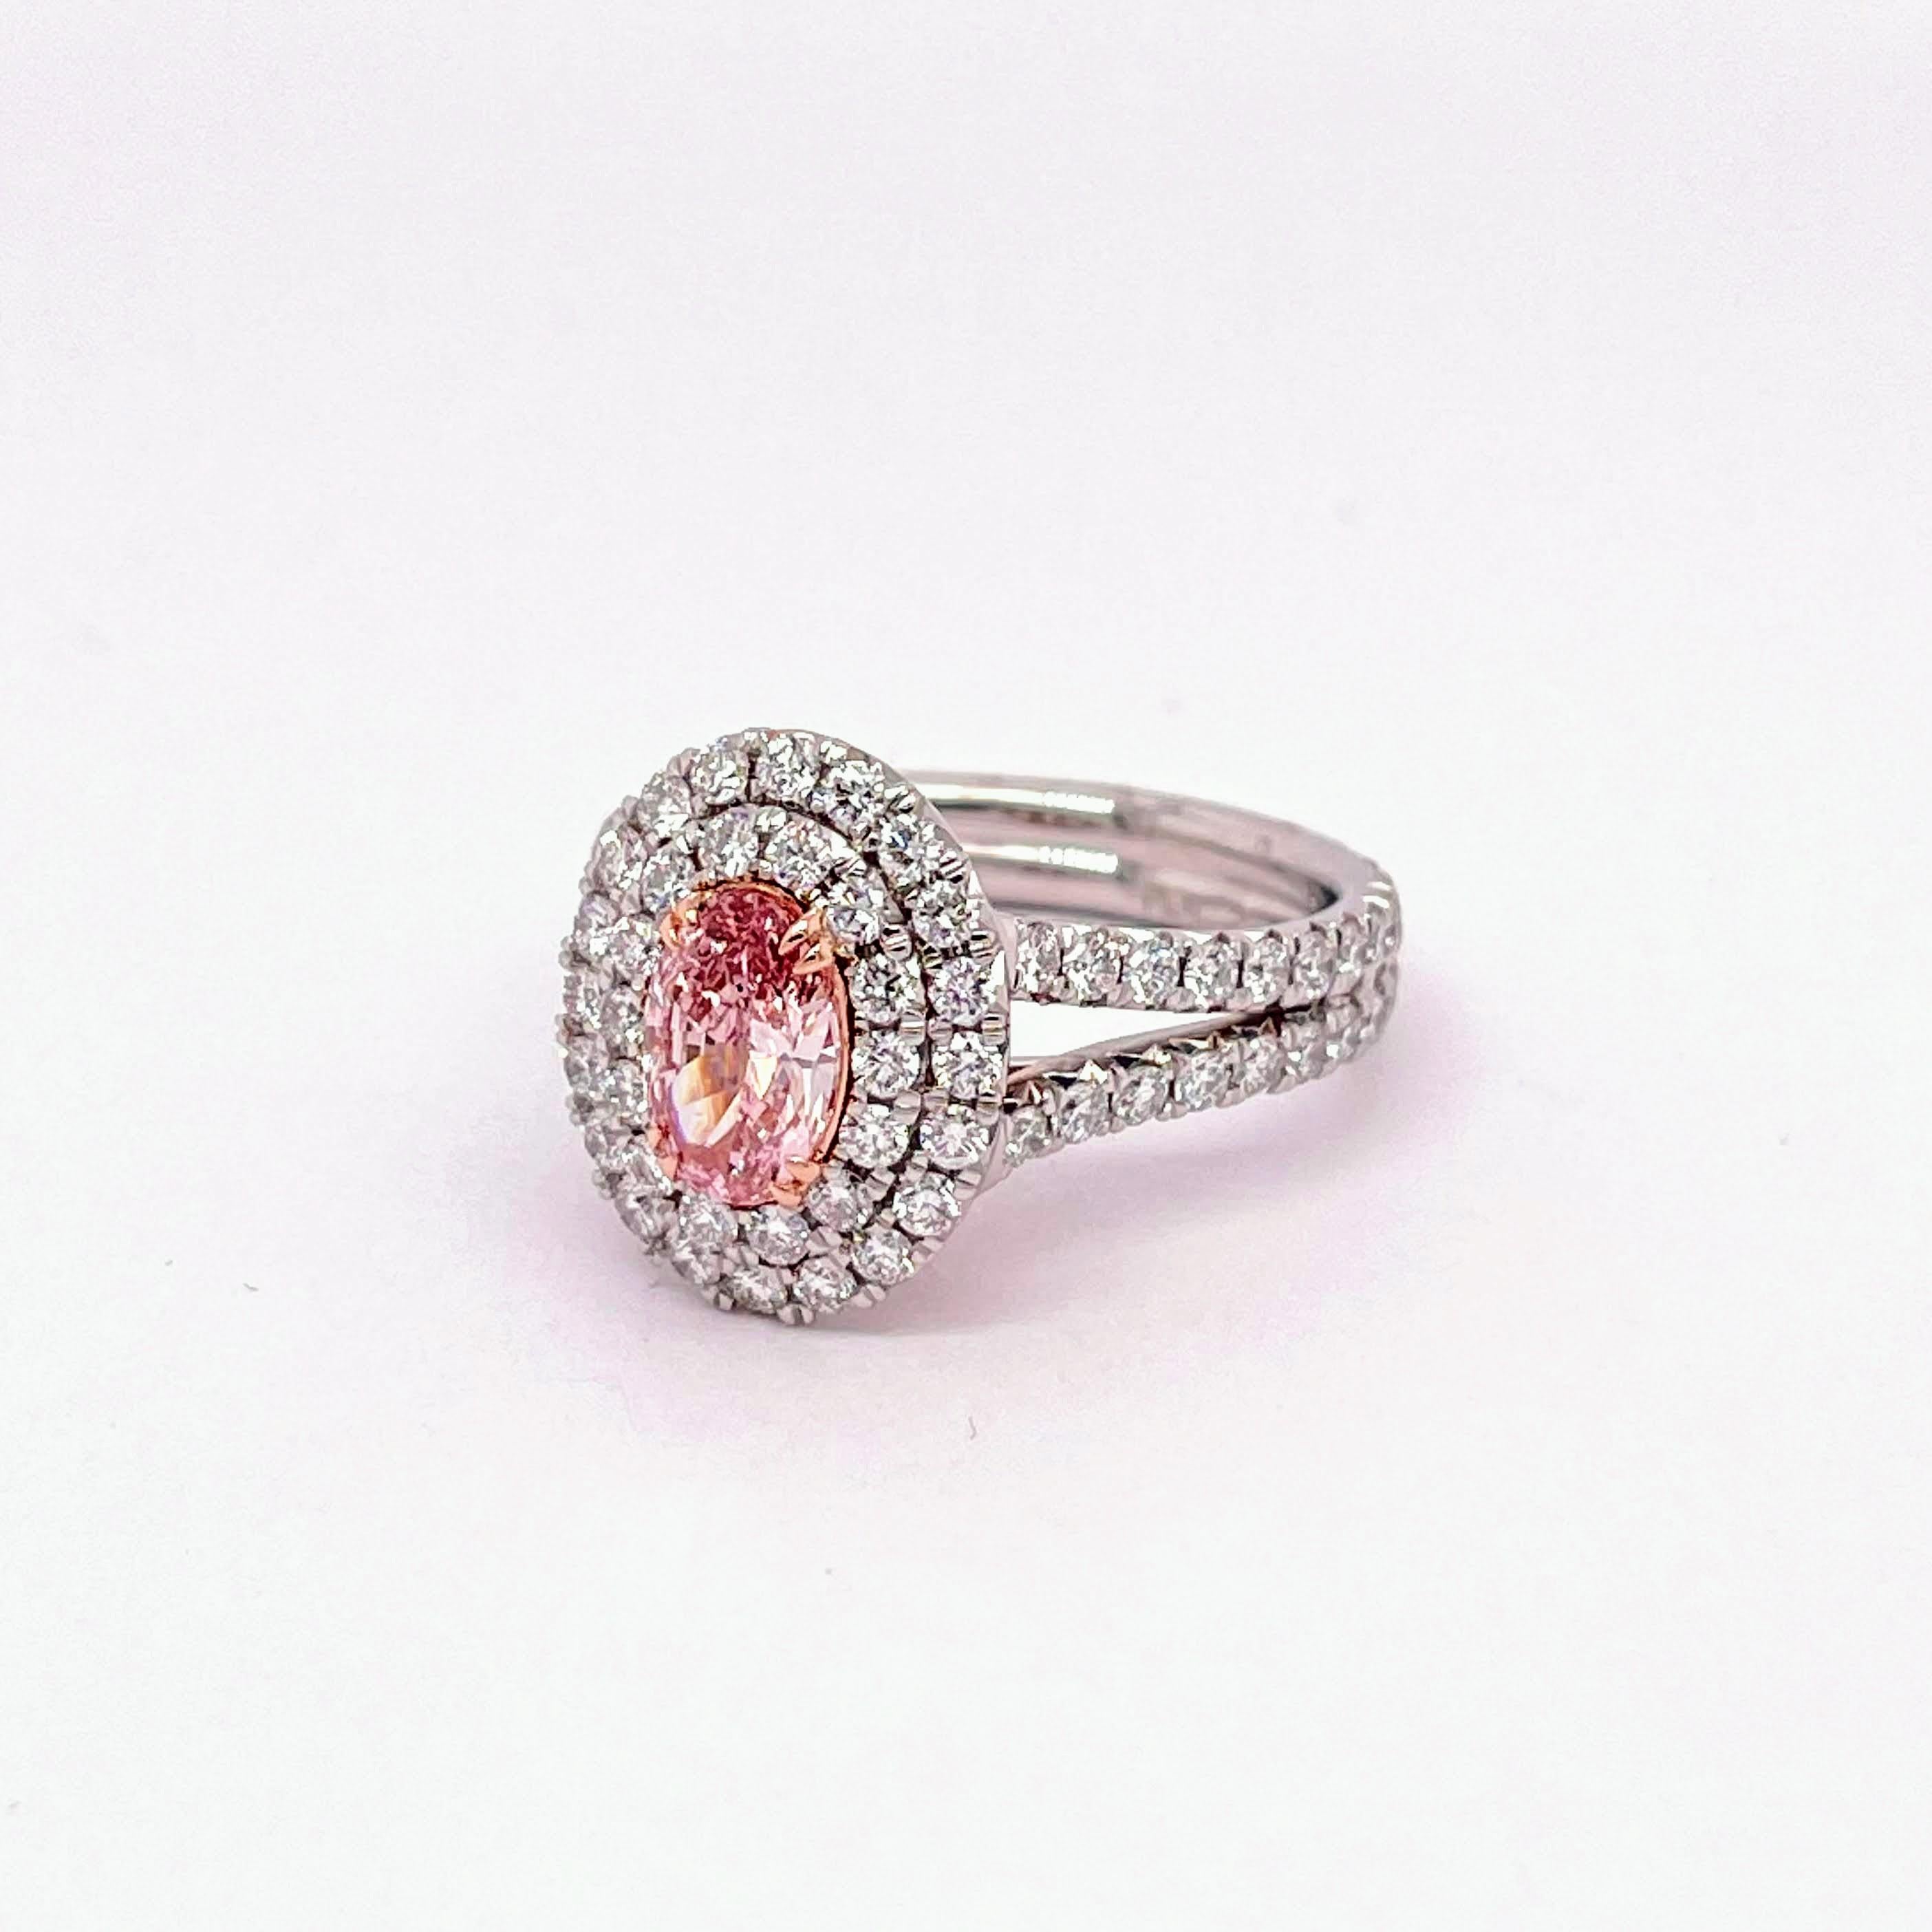 GIA Certified Oval Shape Cut Diamond 0.67, Fancy Intense Pink Color VS1 Clarity that rests on a 18K Rose basket and claw prongs. Platinum mounted double halo and split shank made of 1.44 carat of excellent colored round diamonds. Made to perfection